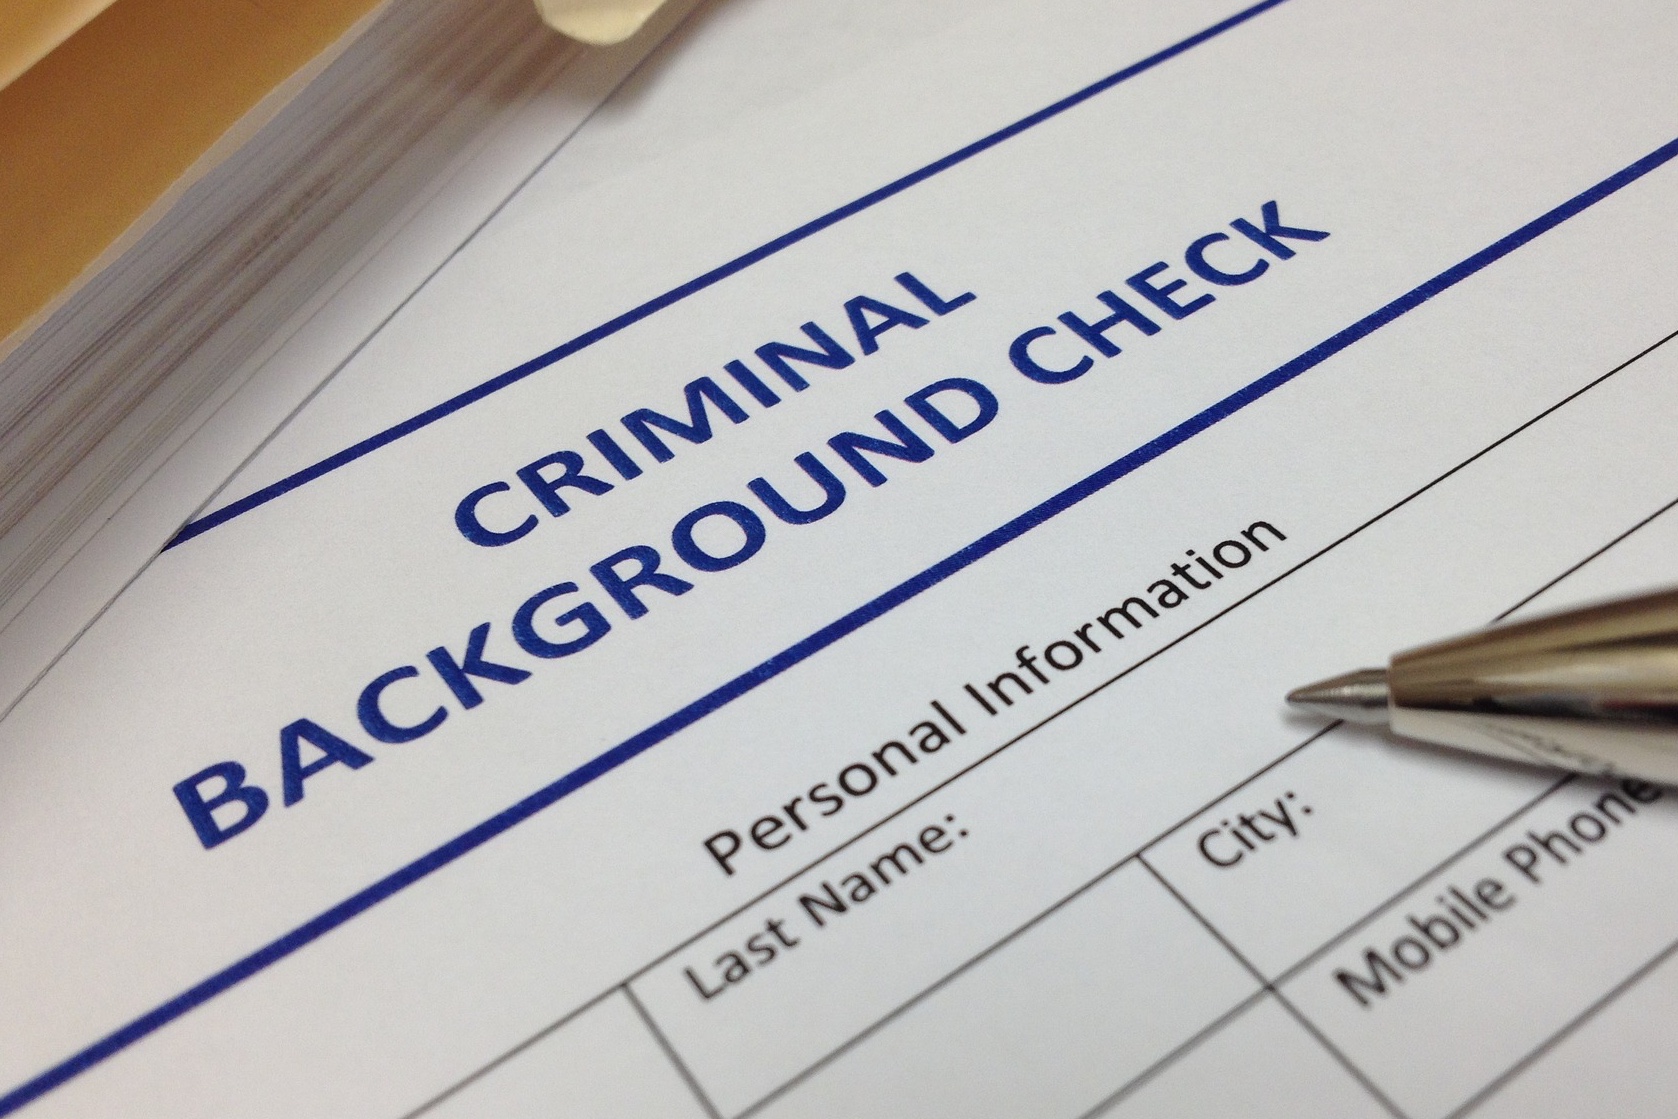 Background_check